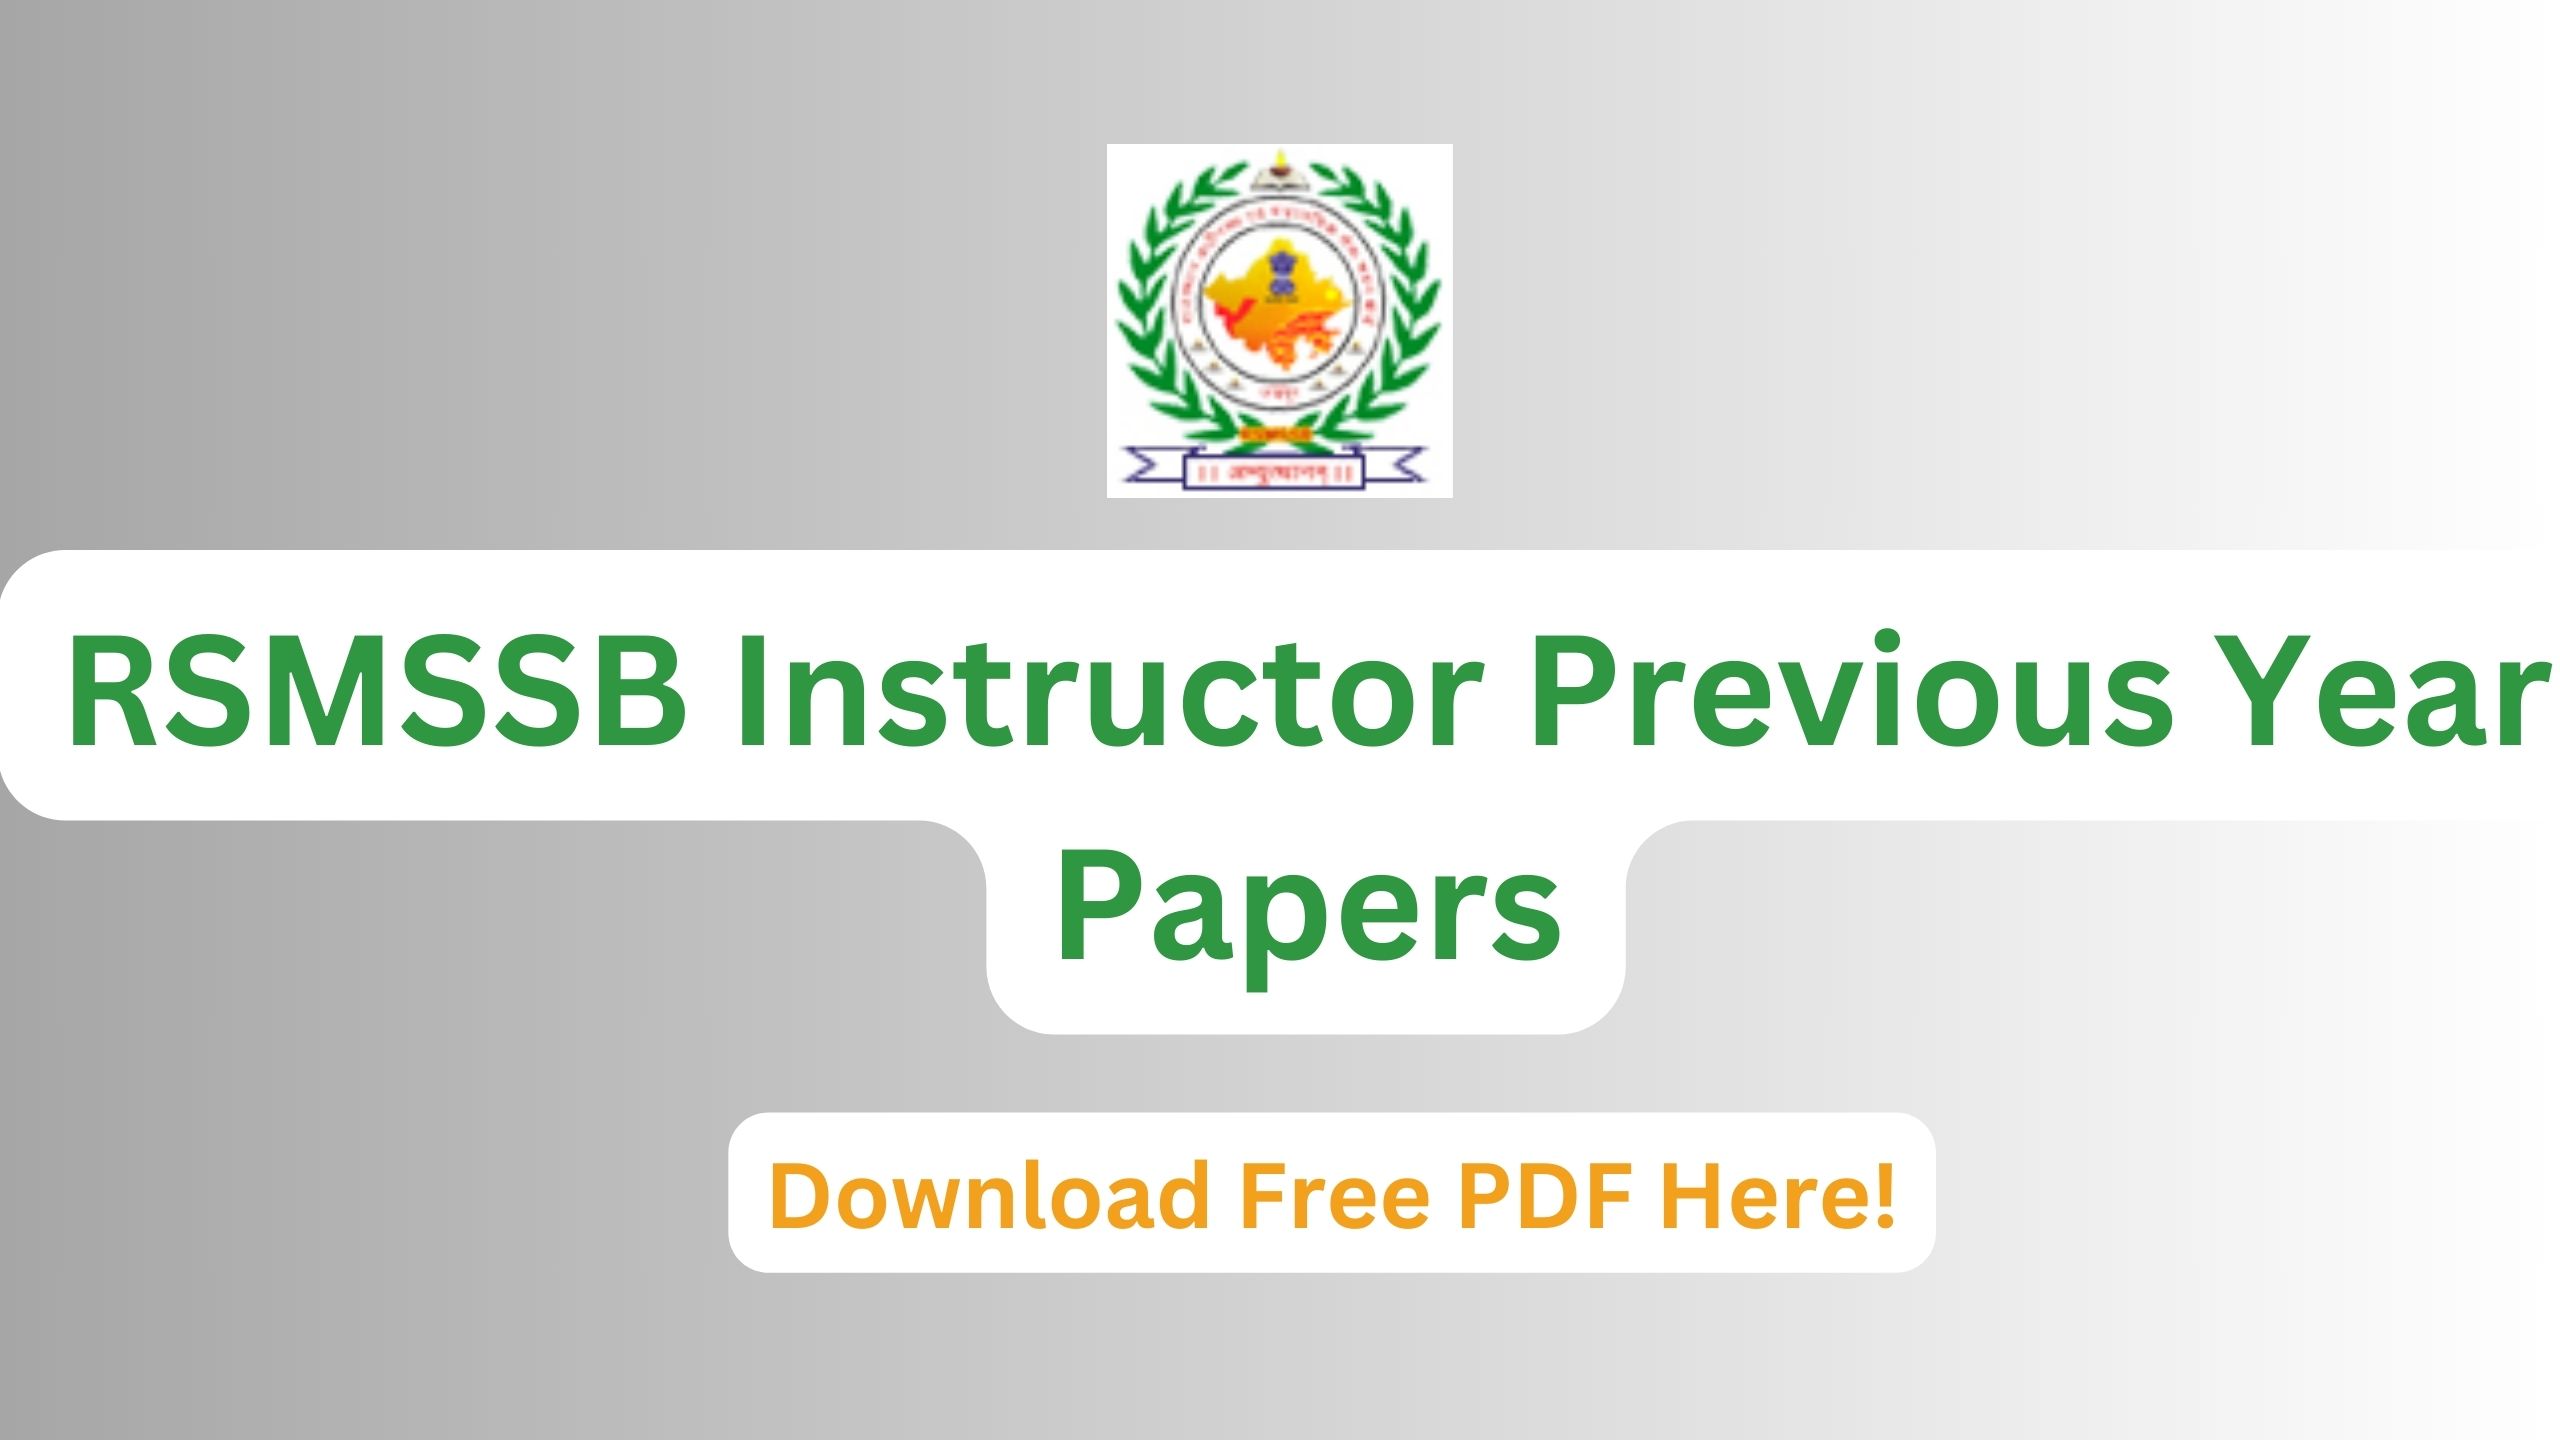 RSMSSB Instructor Previous Year Papers